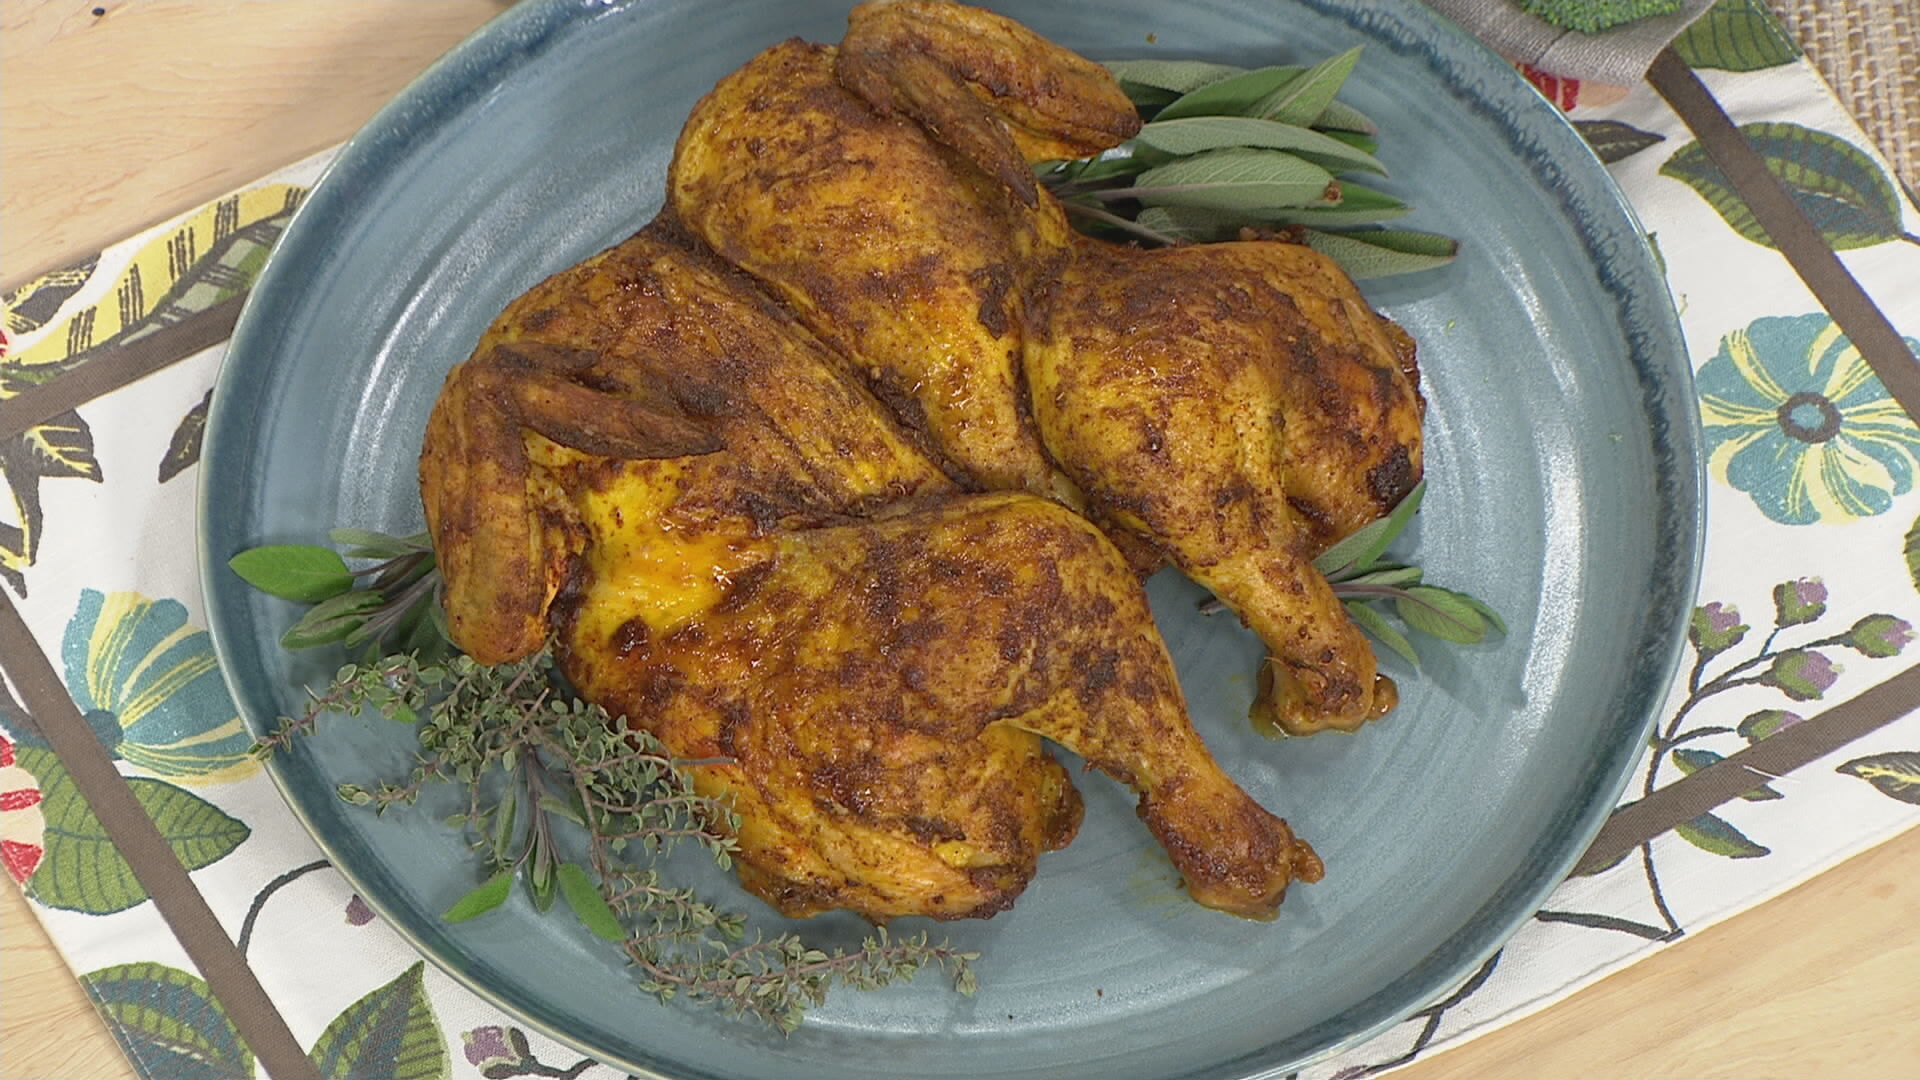 Moroccan spiced spatchcock chicken